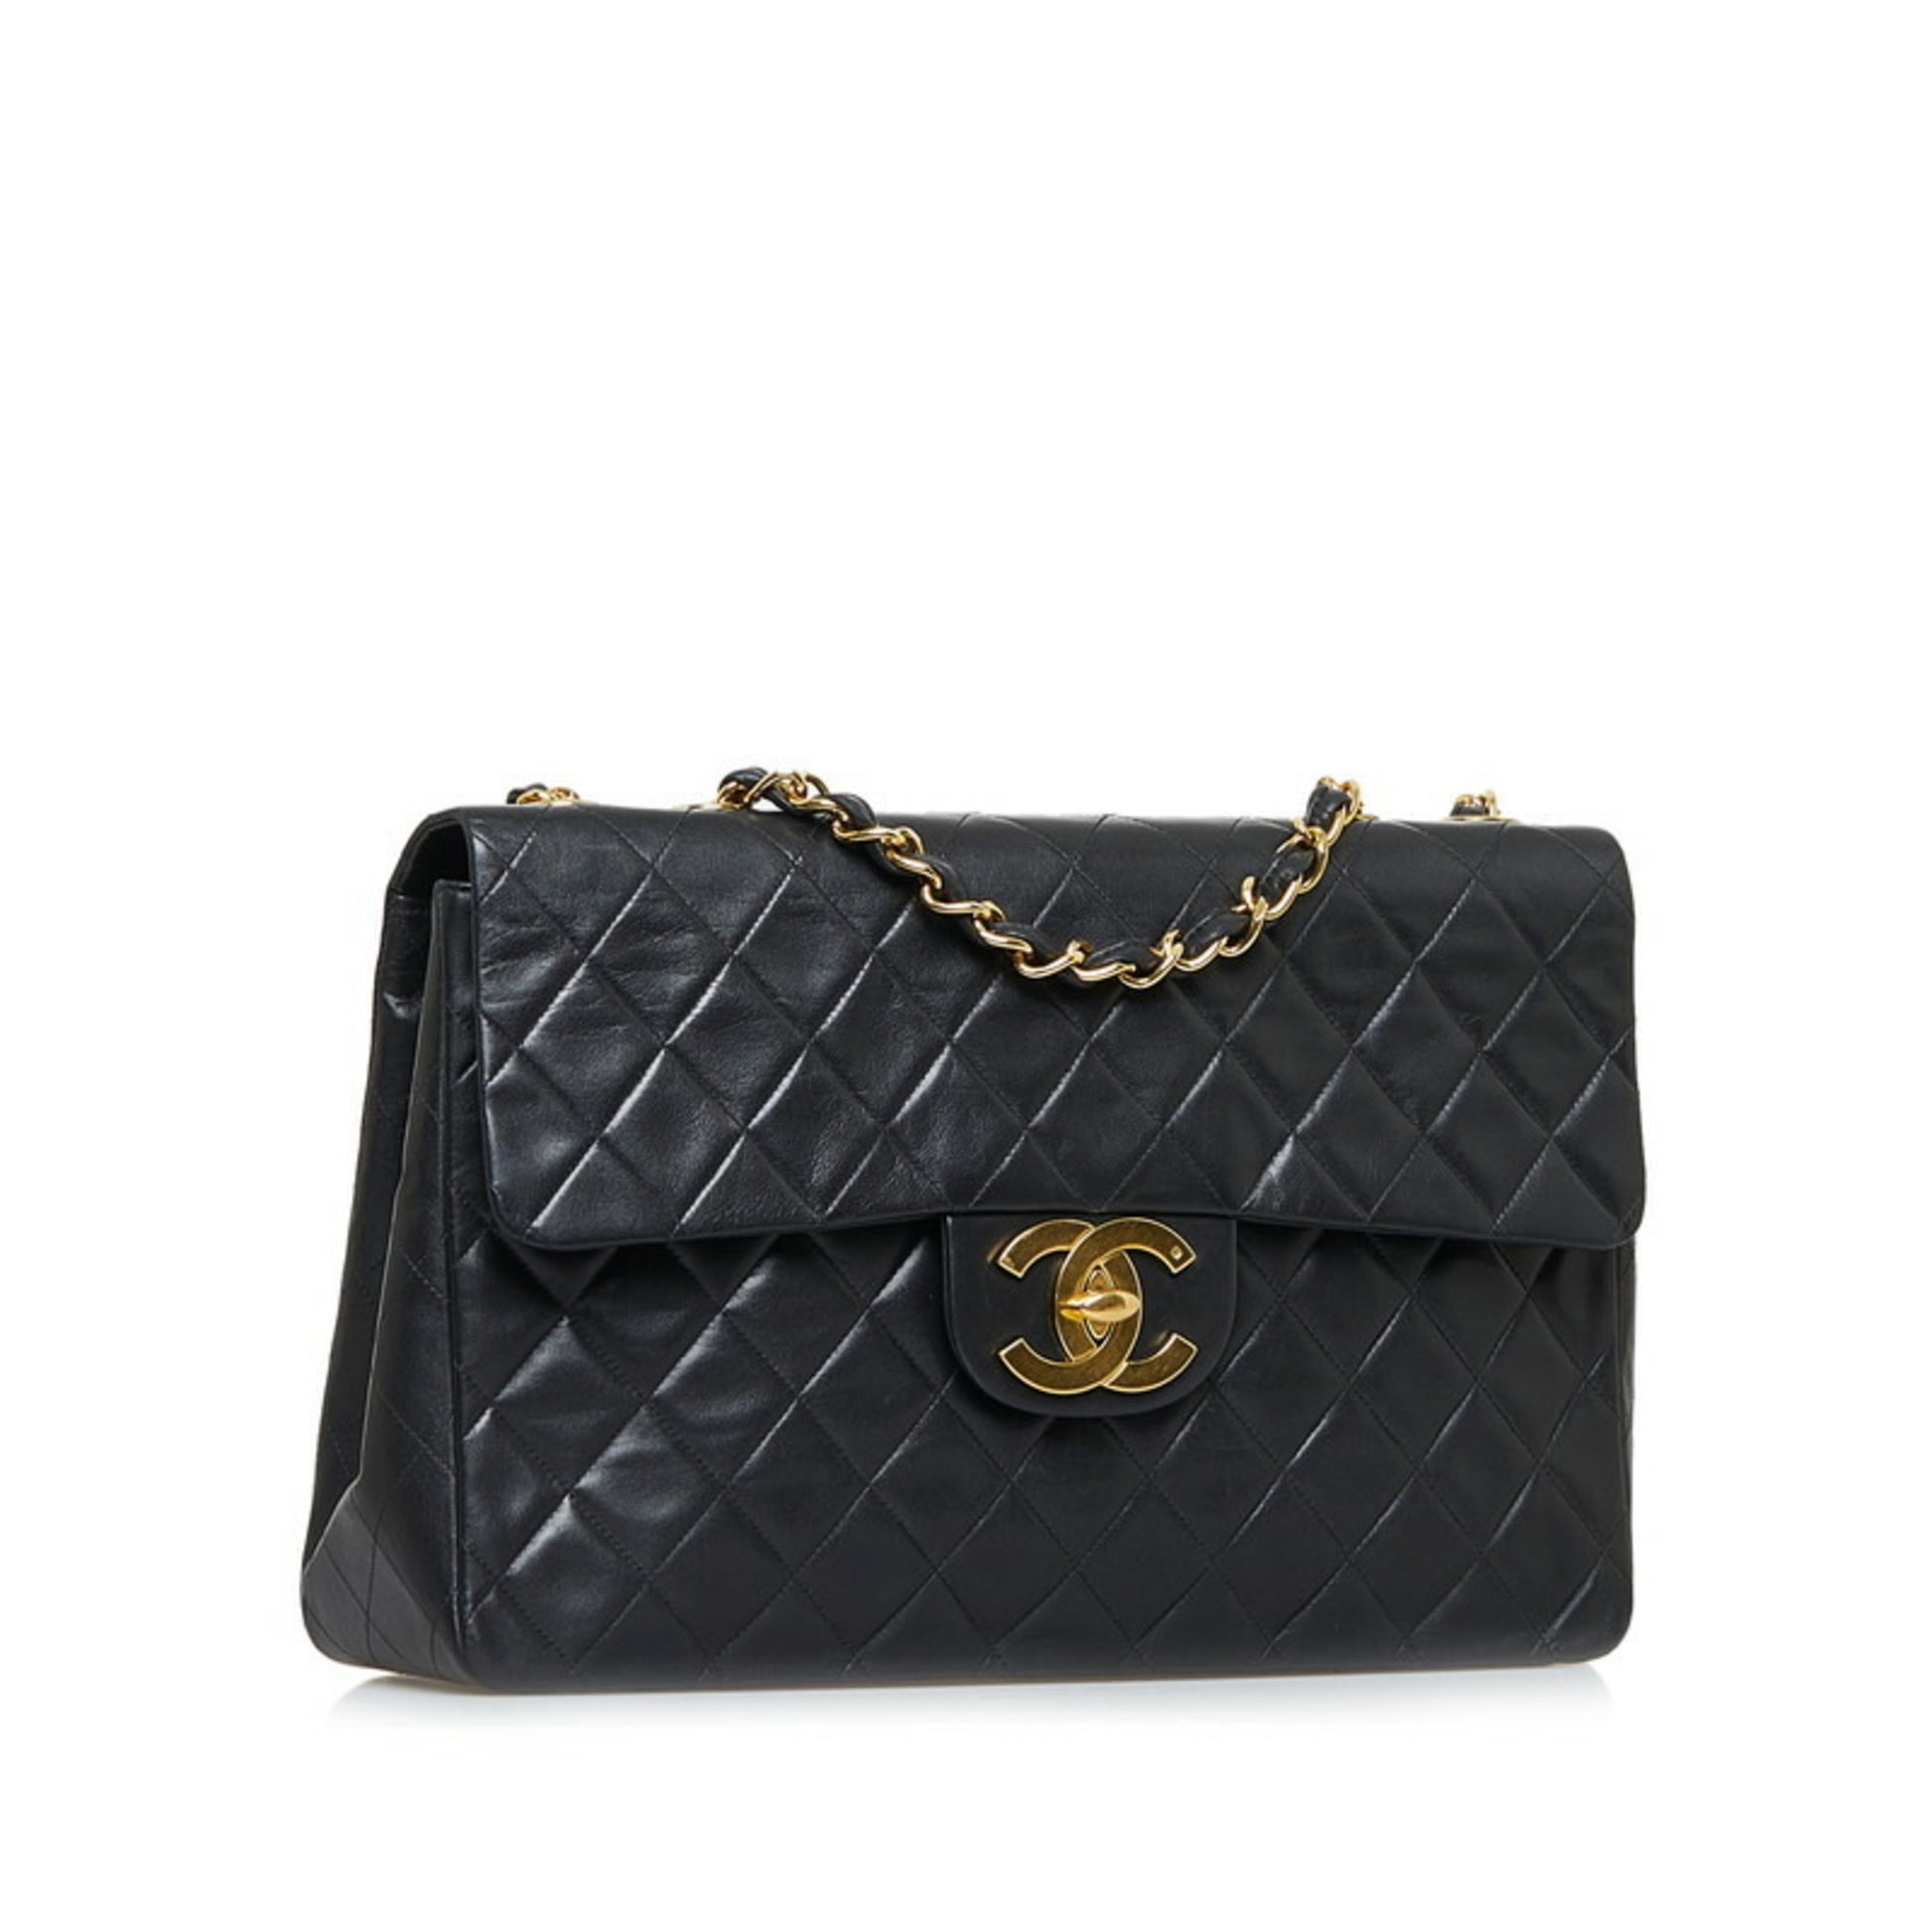 Chanel Single Flap Quilted Lambskin Shoulder Bag Circa